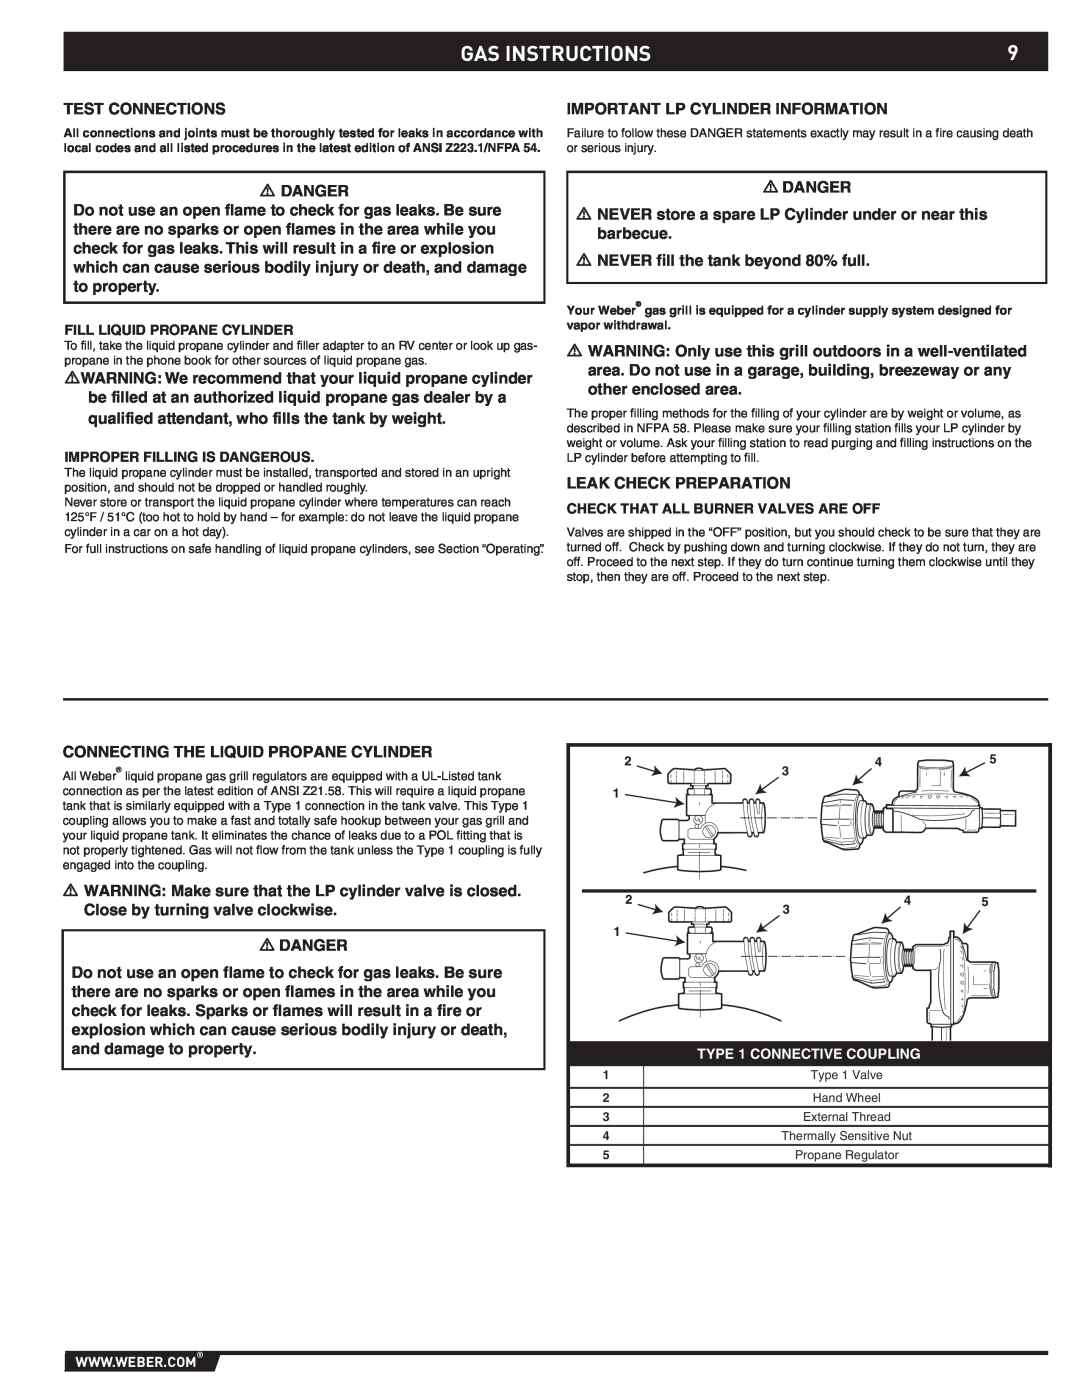 Weber 89796 manual Gas Instructions 